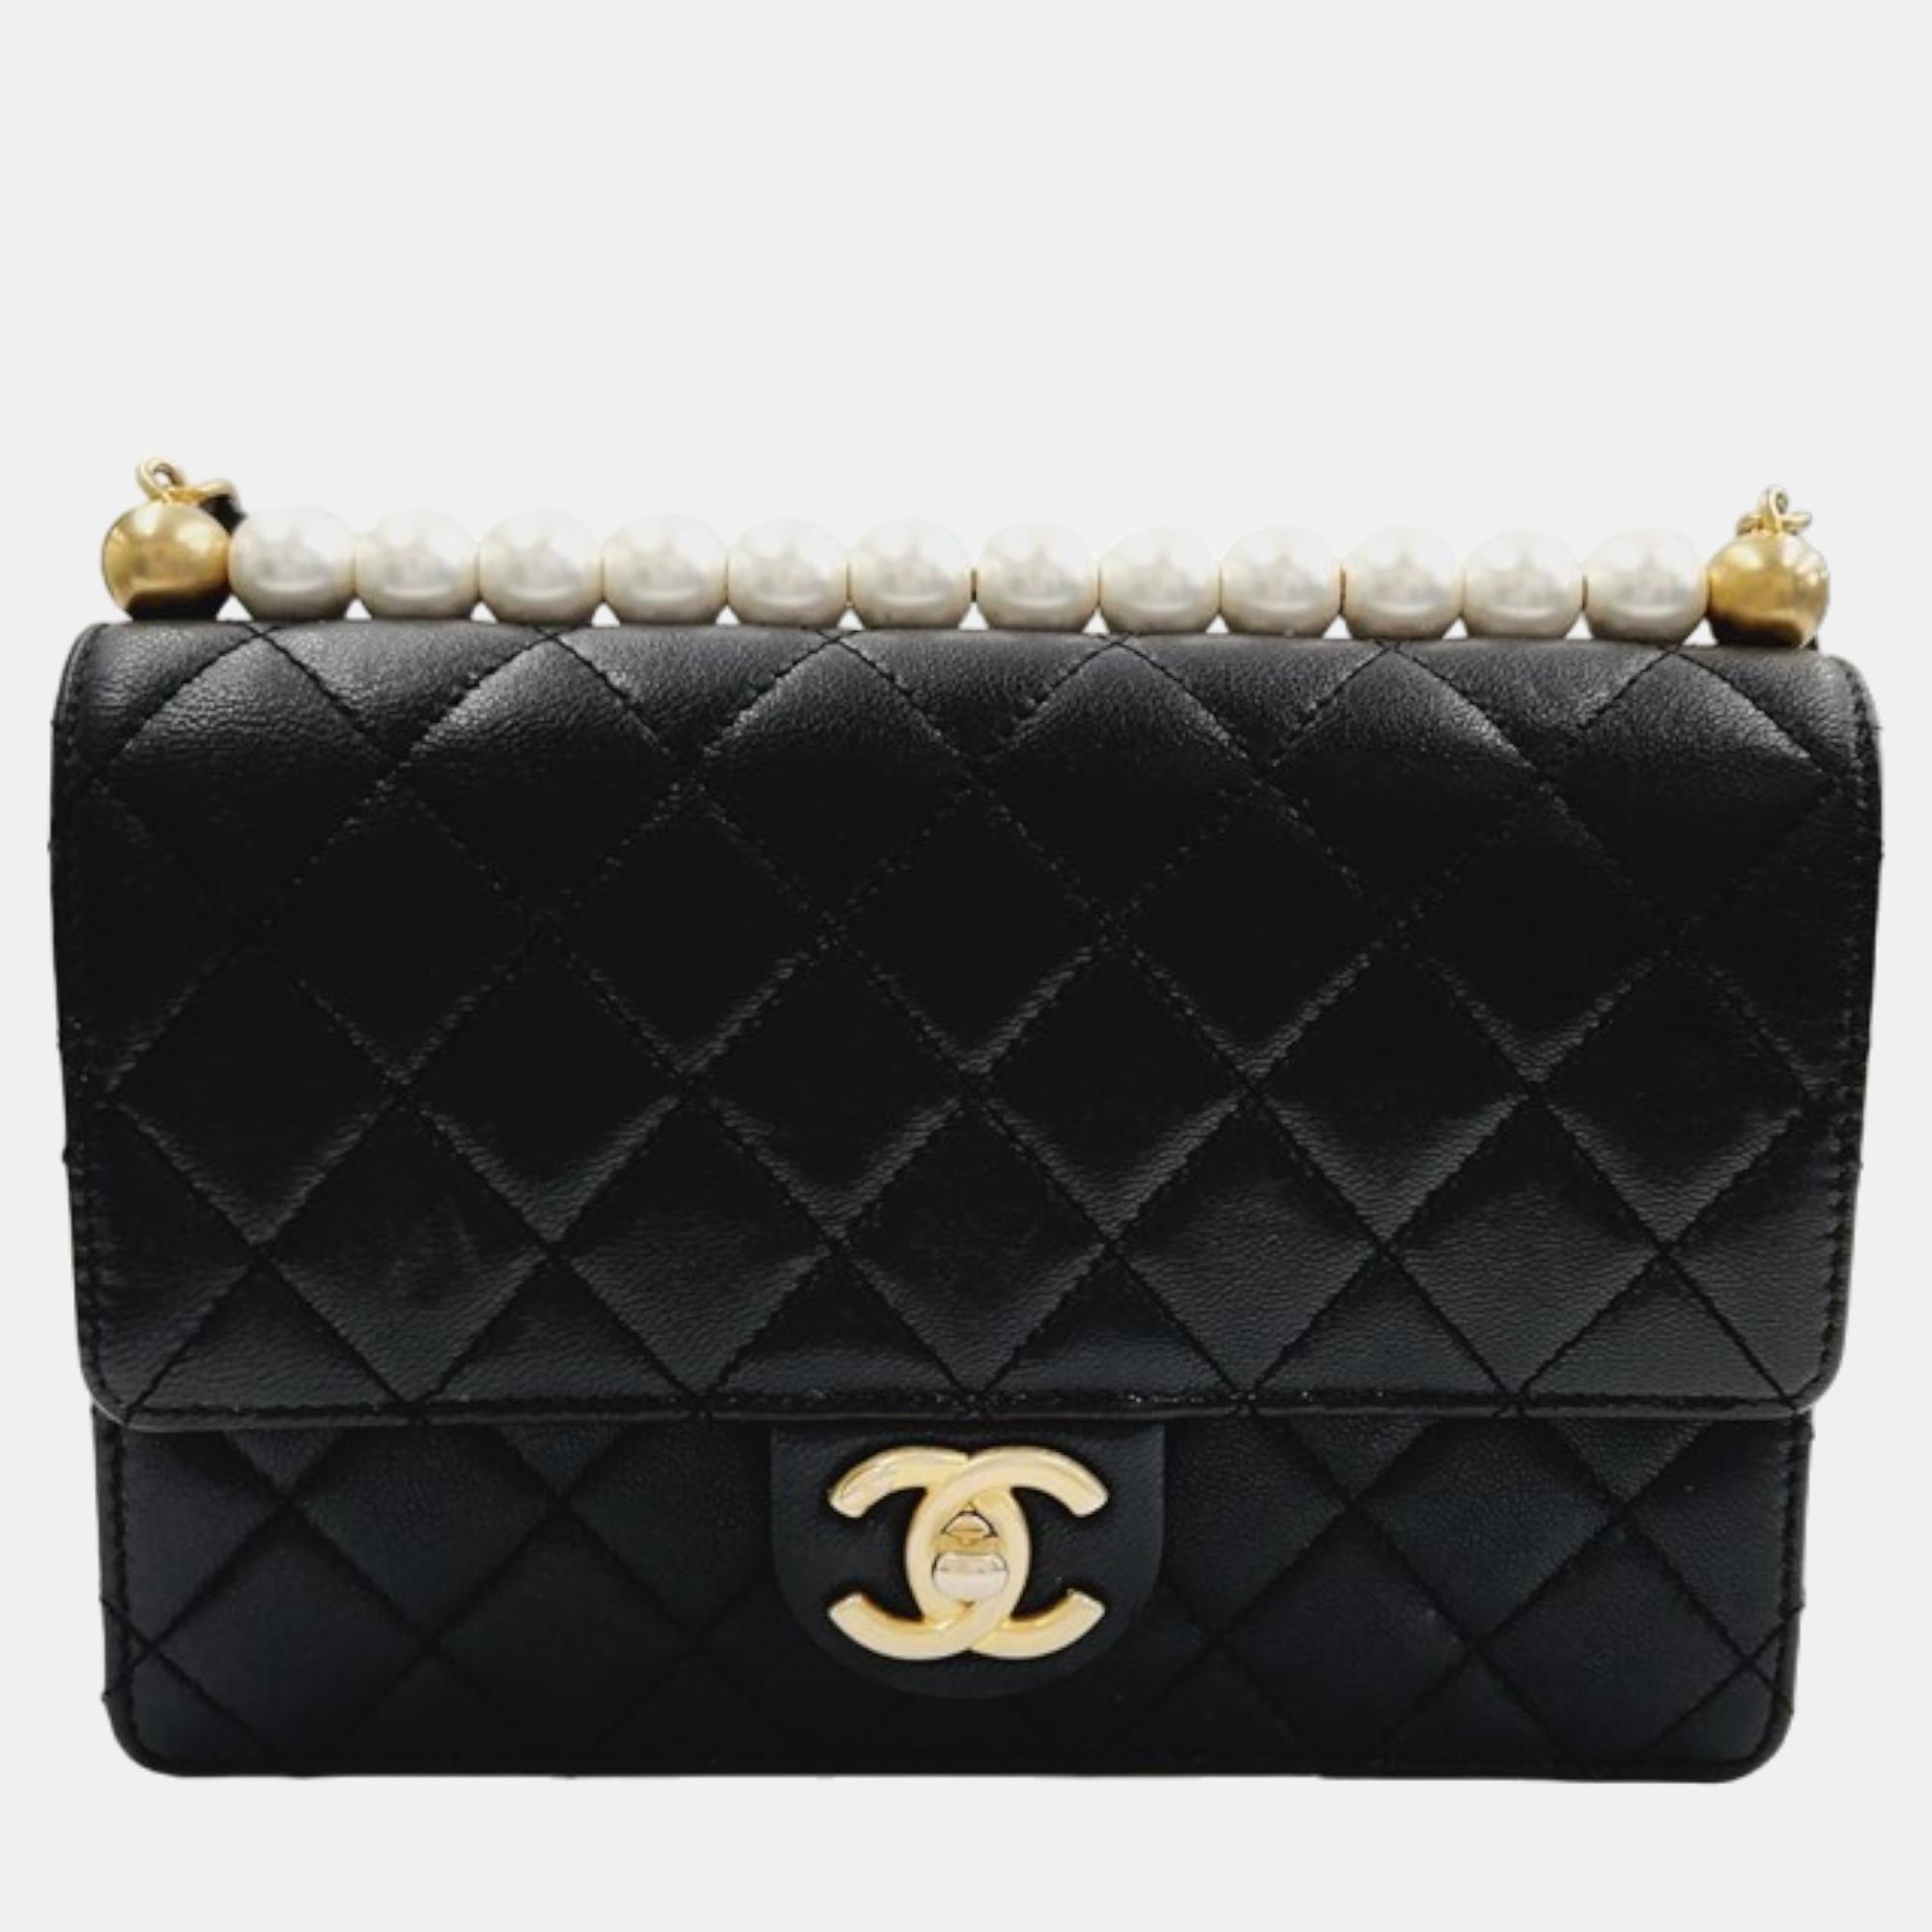 Pre-owned Chanel Black Leather Medium Chic Pearls Flap Bag